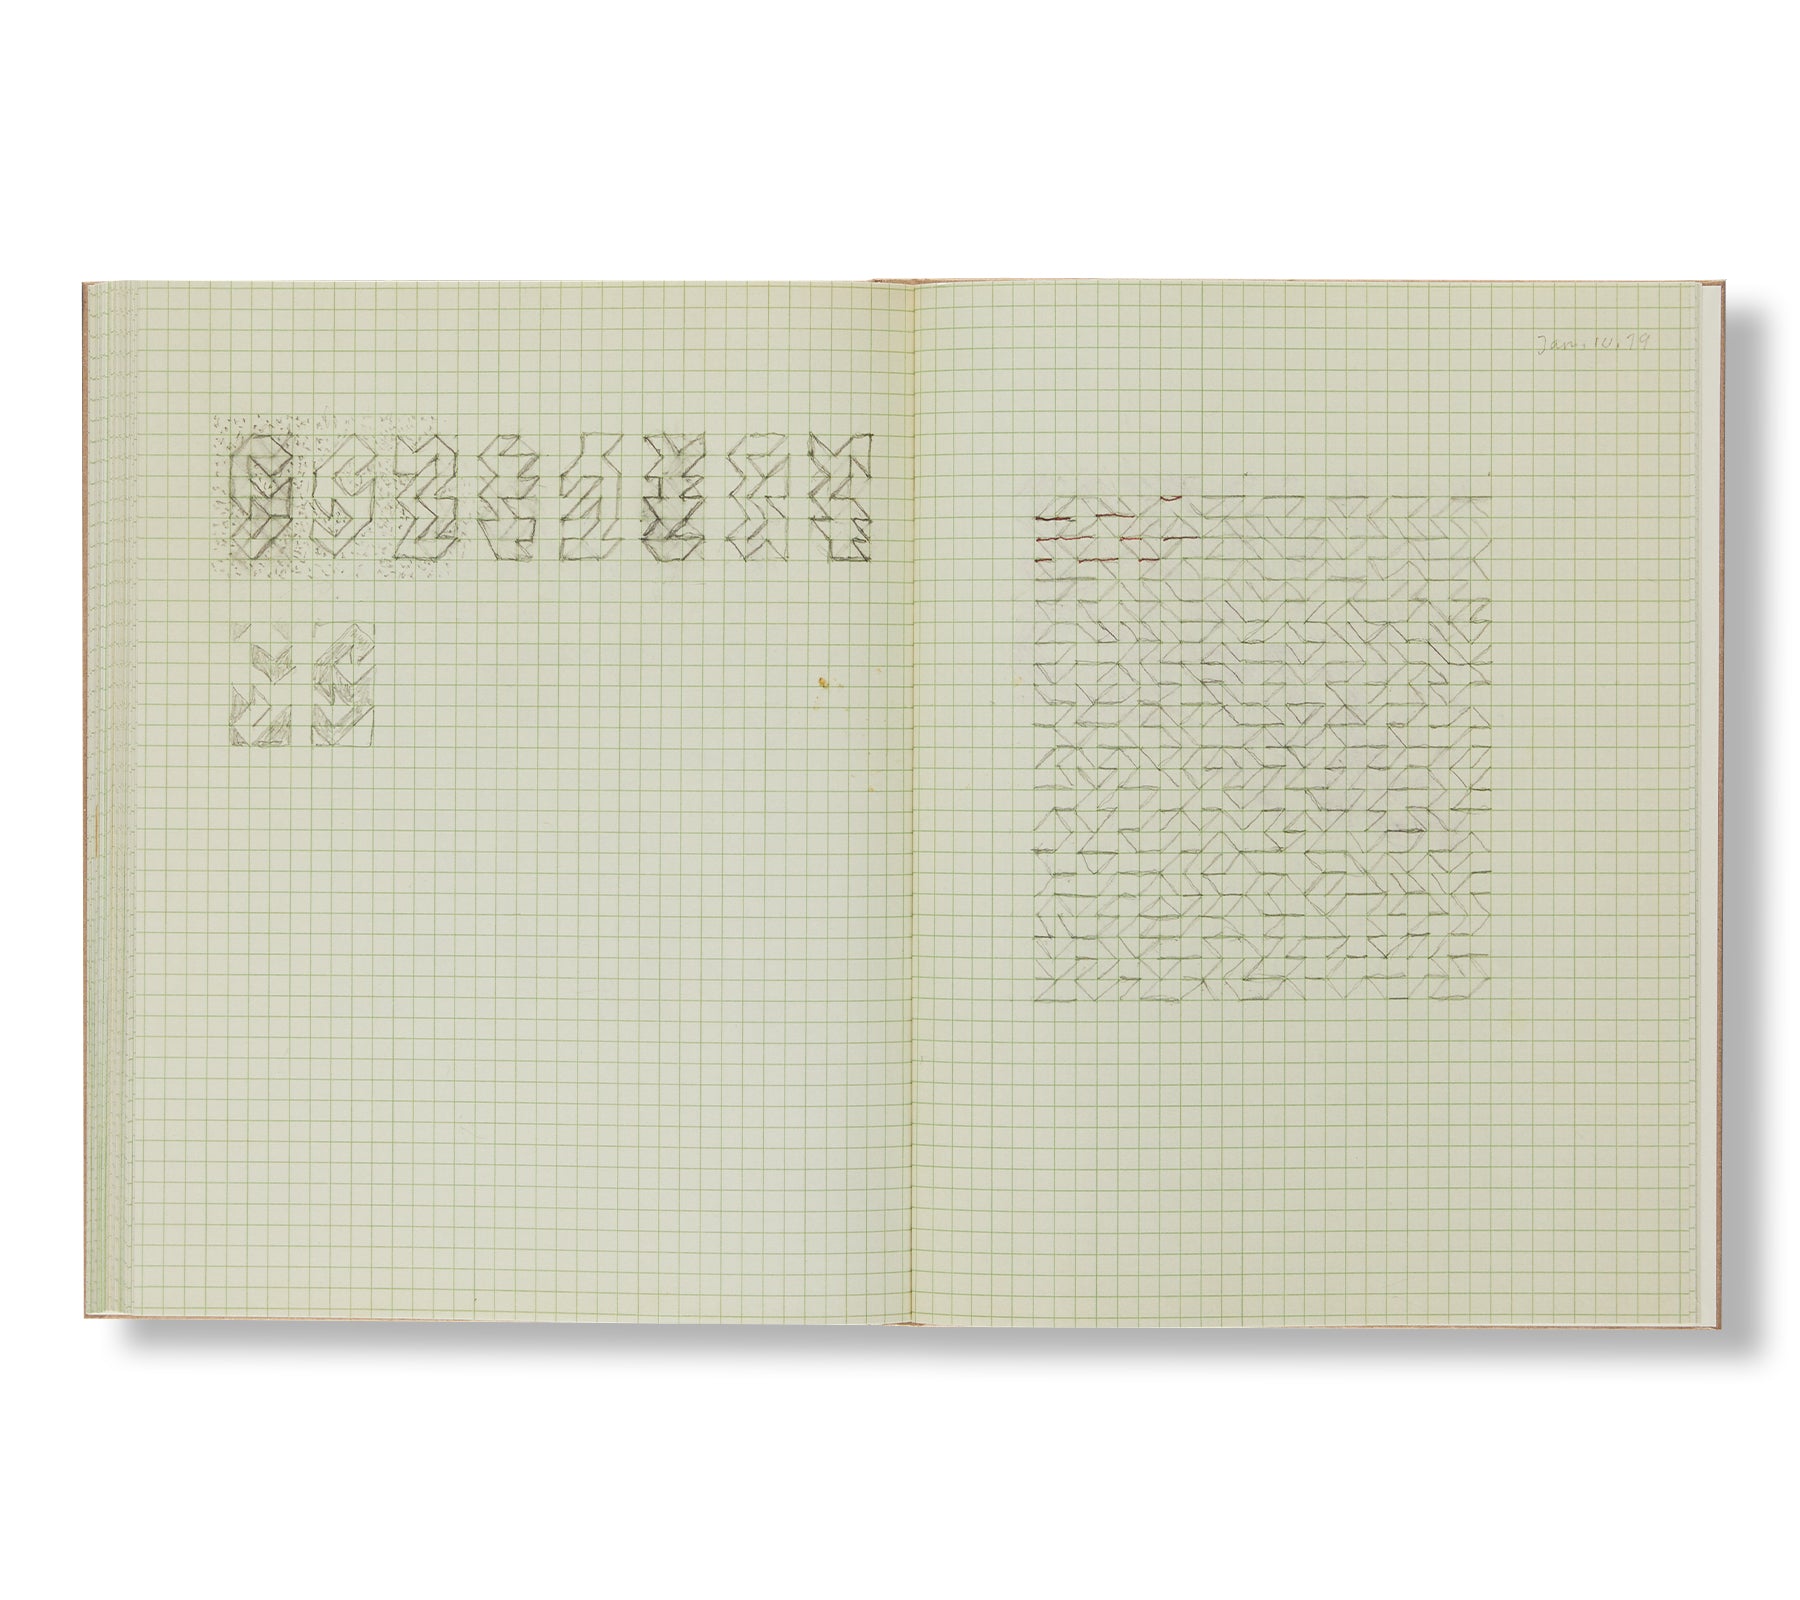 NOTEBOOK 1970–1980 by Anni Albers